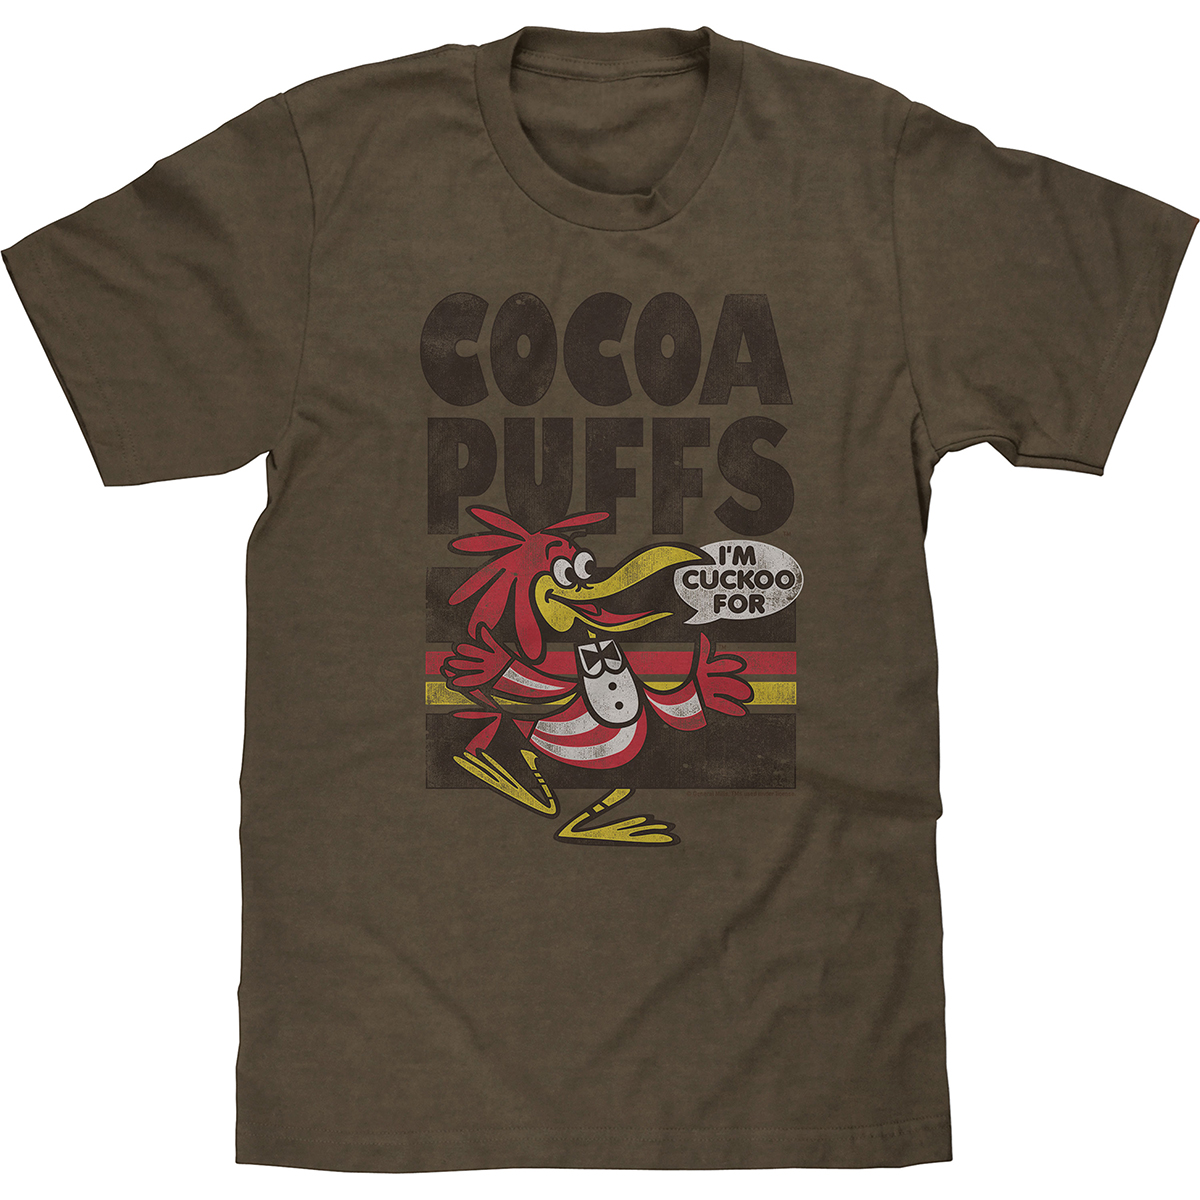 Cocoa Puffs Young Men's Short-Sleeve Graphic Tee